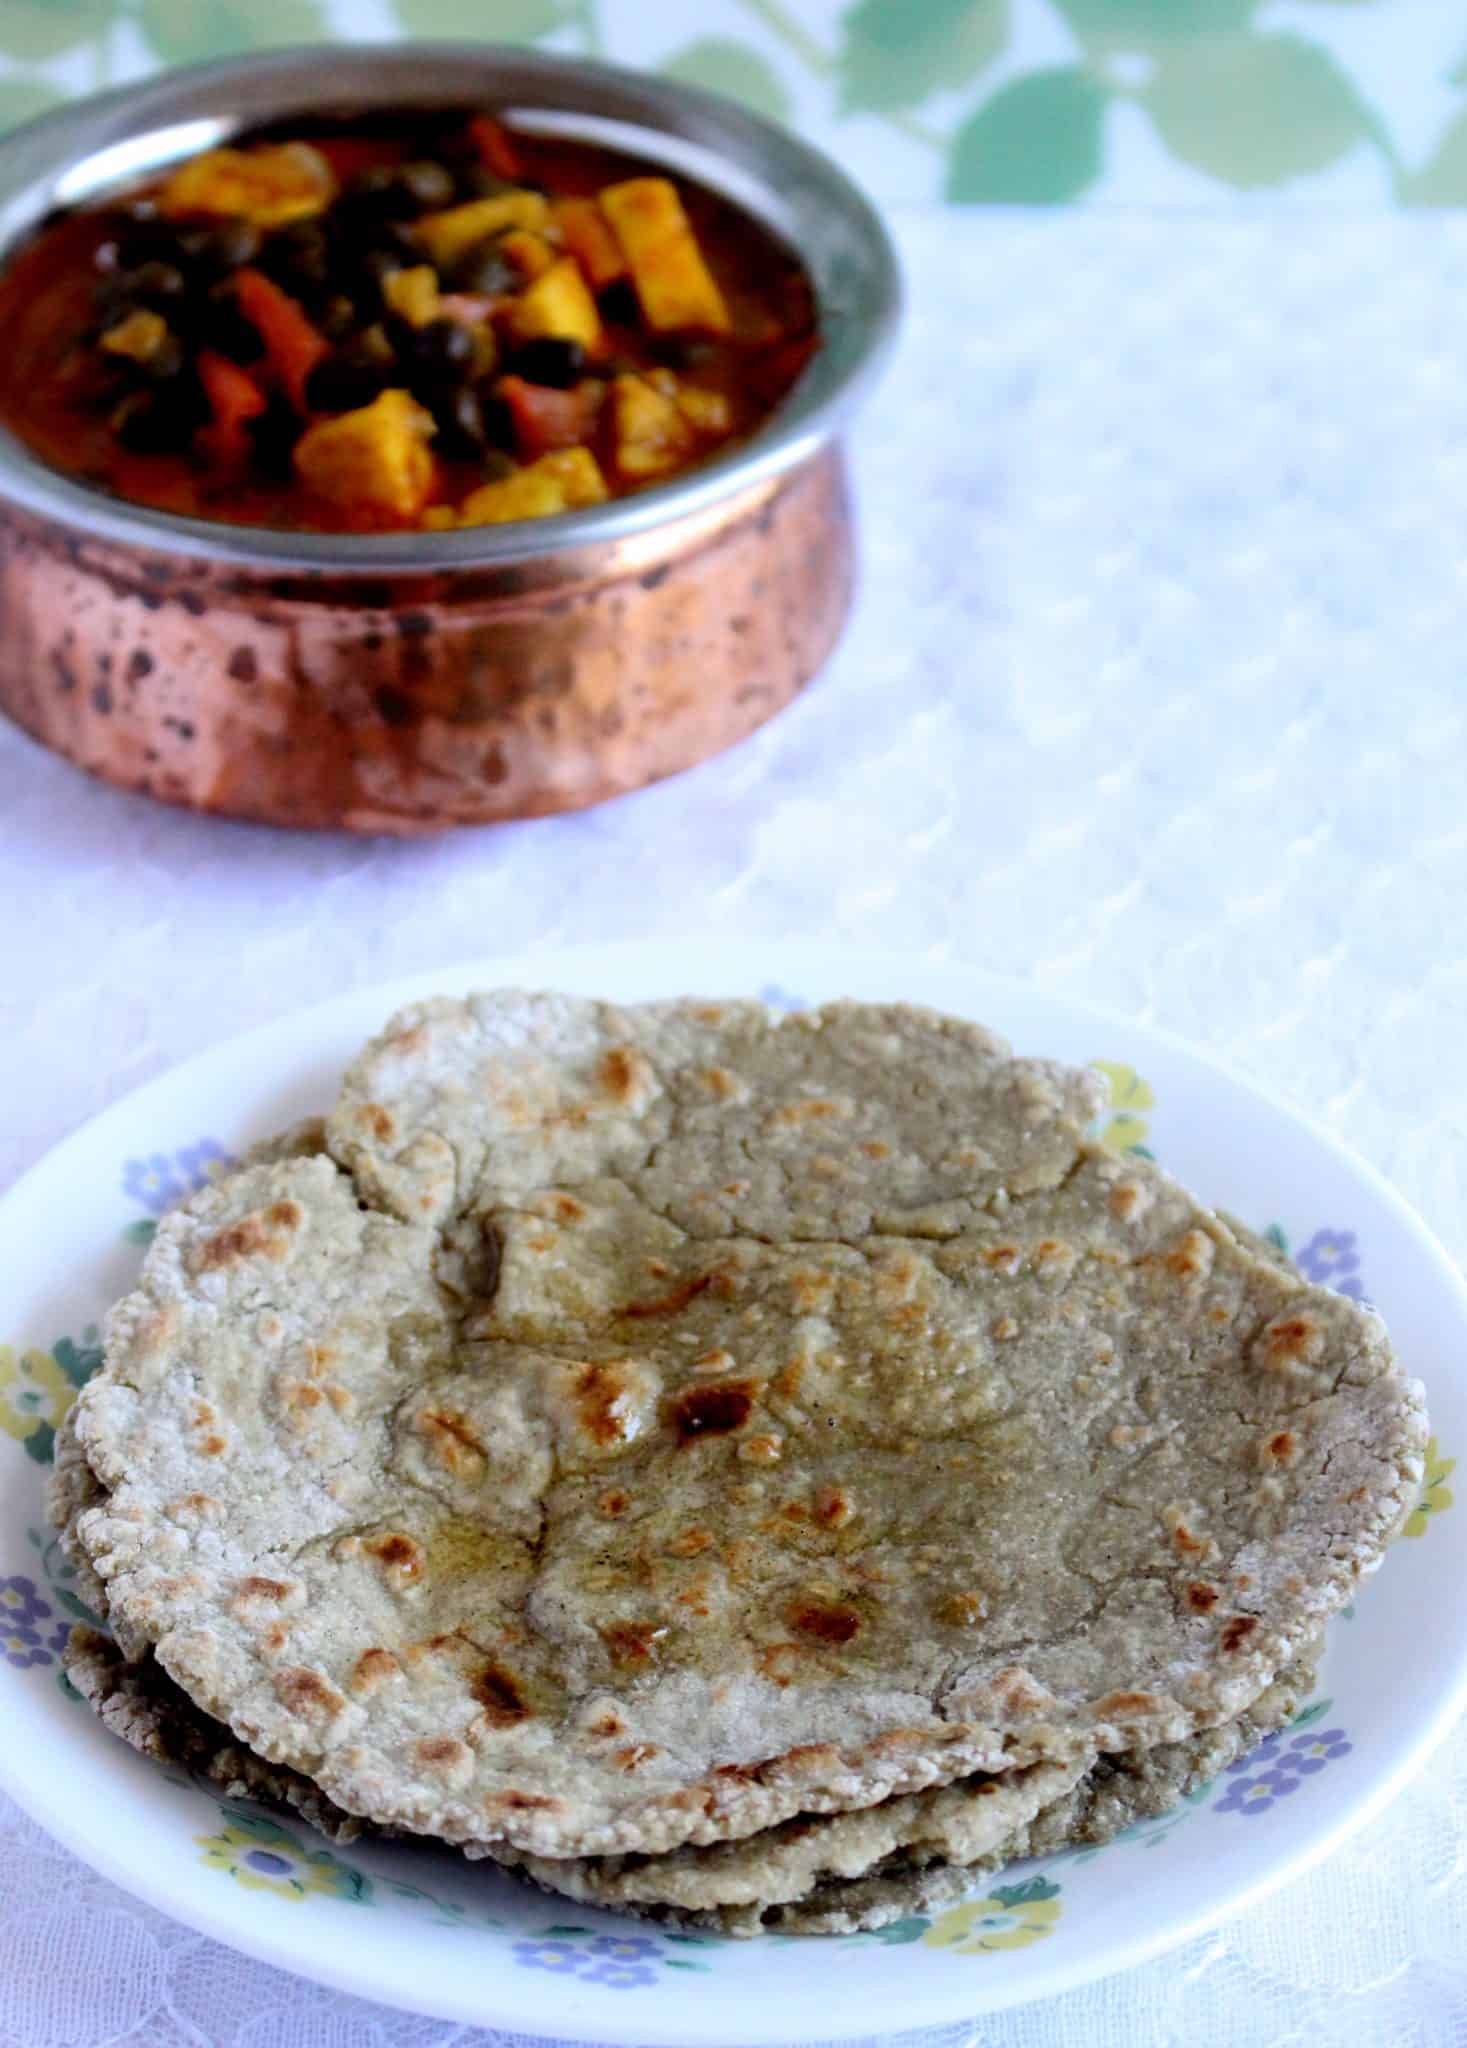 Haryana Bajra Roti - Gluten Free Millet Flatbread is ready and served